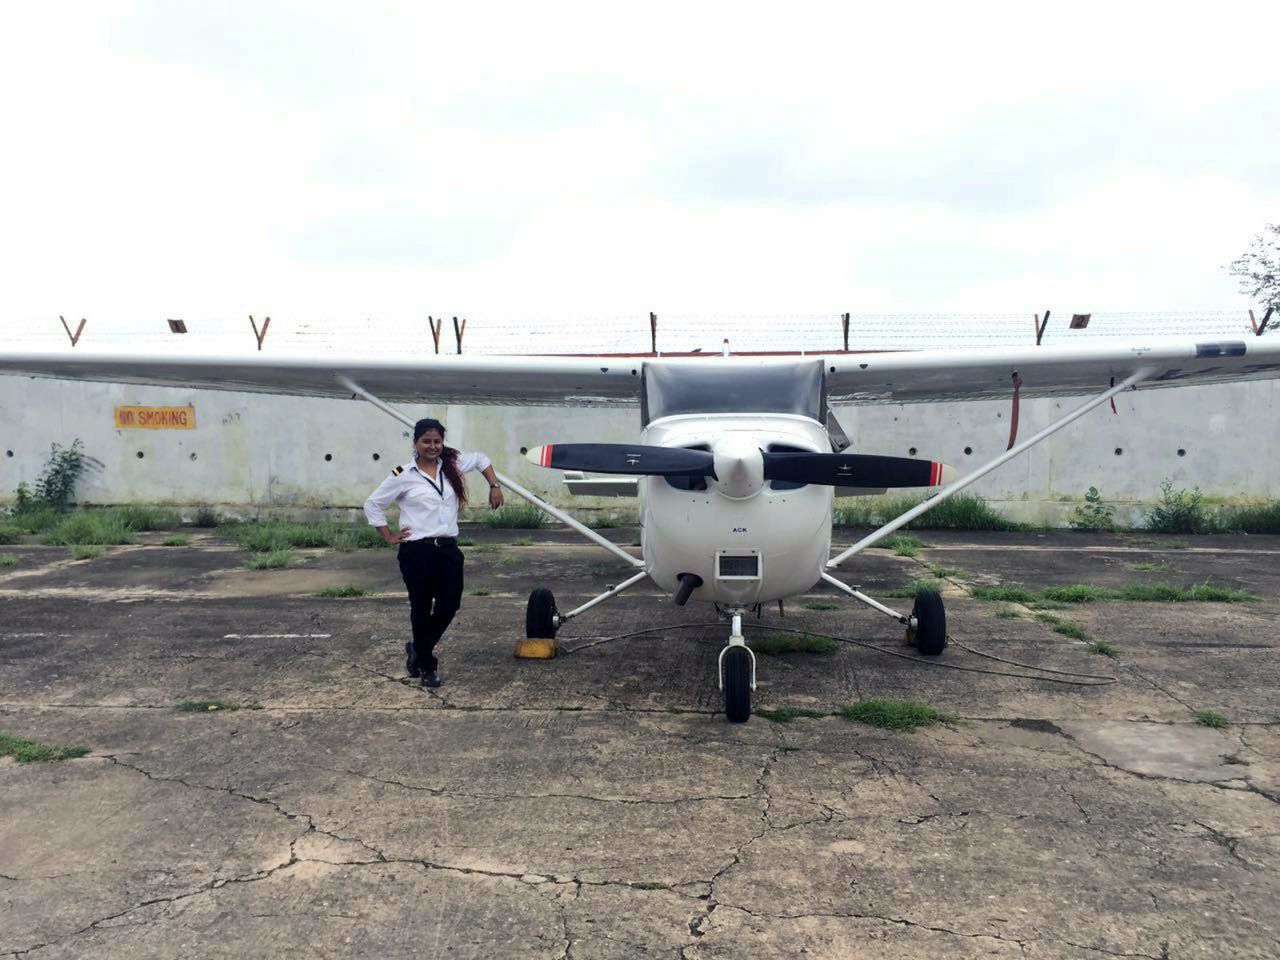 <strong>The sky is calling: </strong>Tarana Saxena, a recent graduate, poses beside a Cessna at Banasthali Vidyapith University. "I couldn't believe how amazing it felt to be in the air," she says of her first flight. "I wanted five more minutes, 10 more minutes...I wanted it to last forever." 